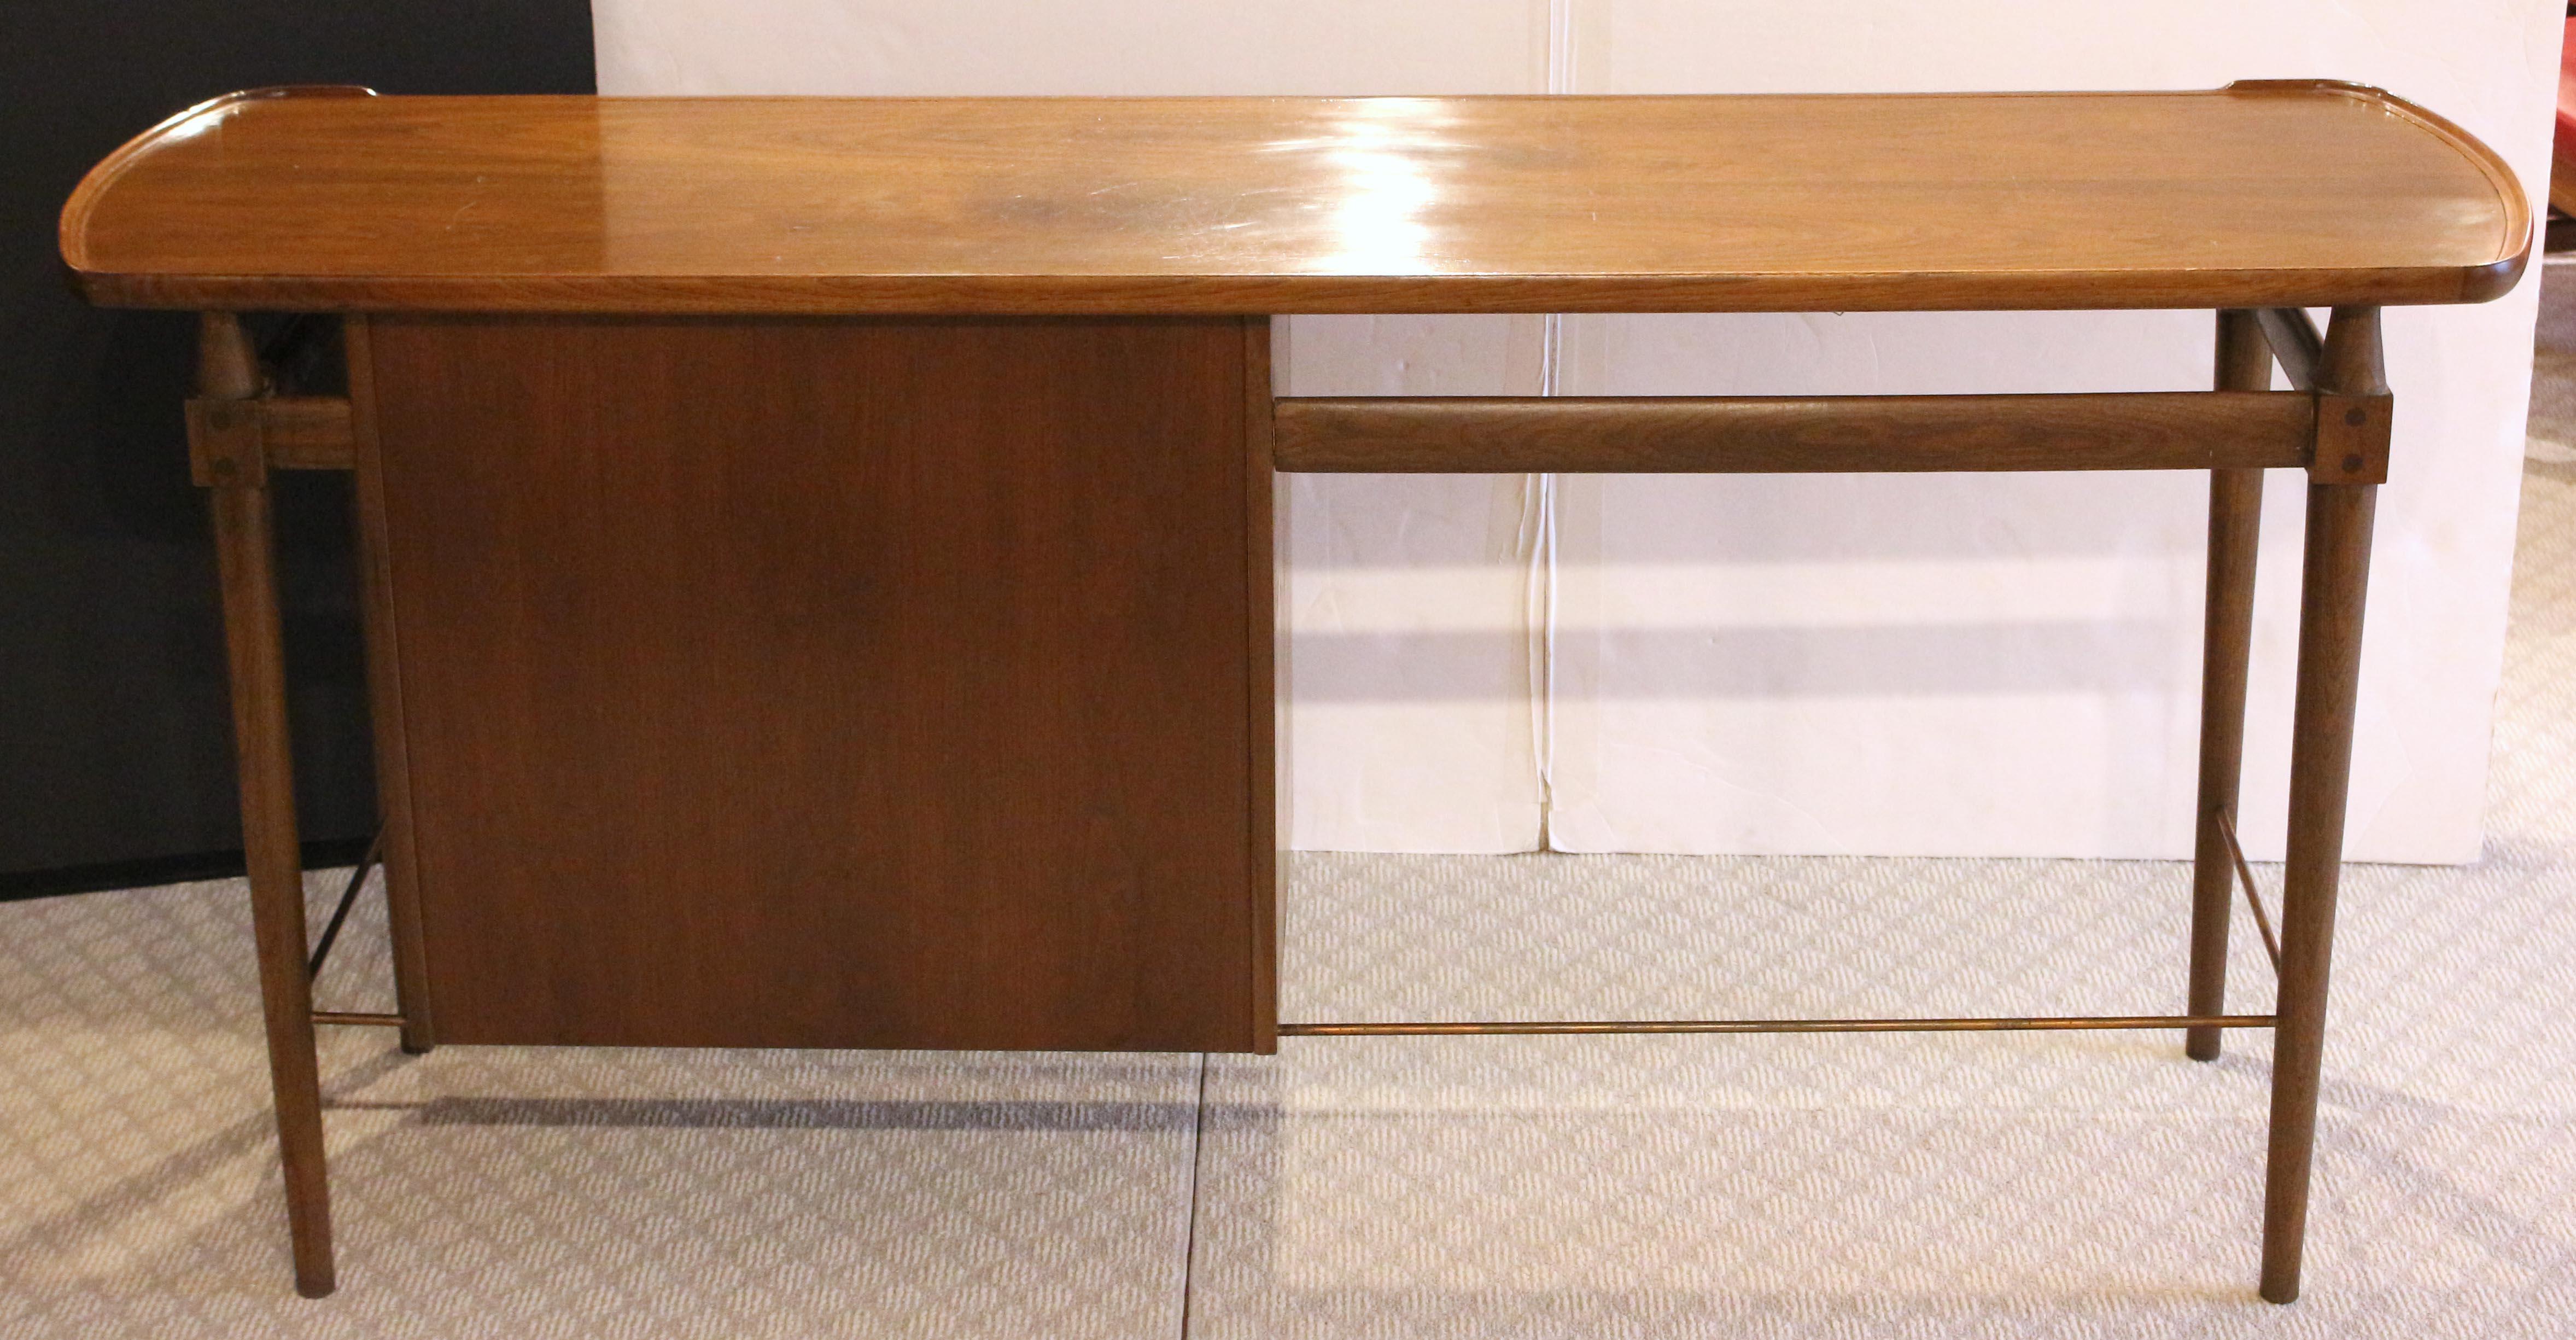 Wood Mid Century Modern Writing Table Desk, American, c.1960s For Sale